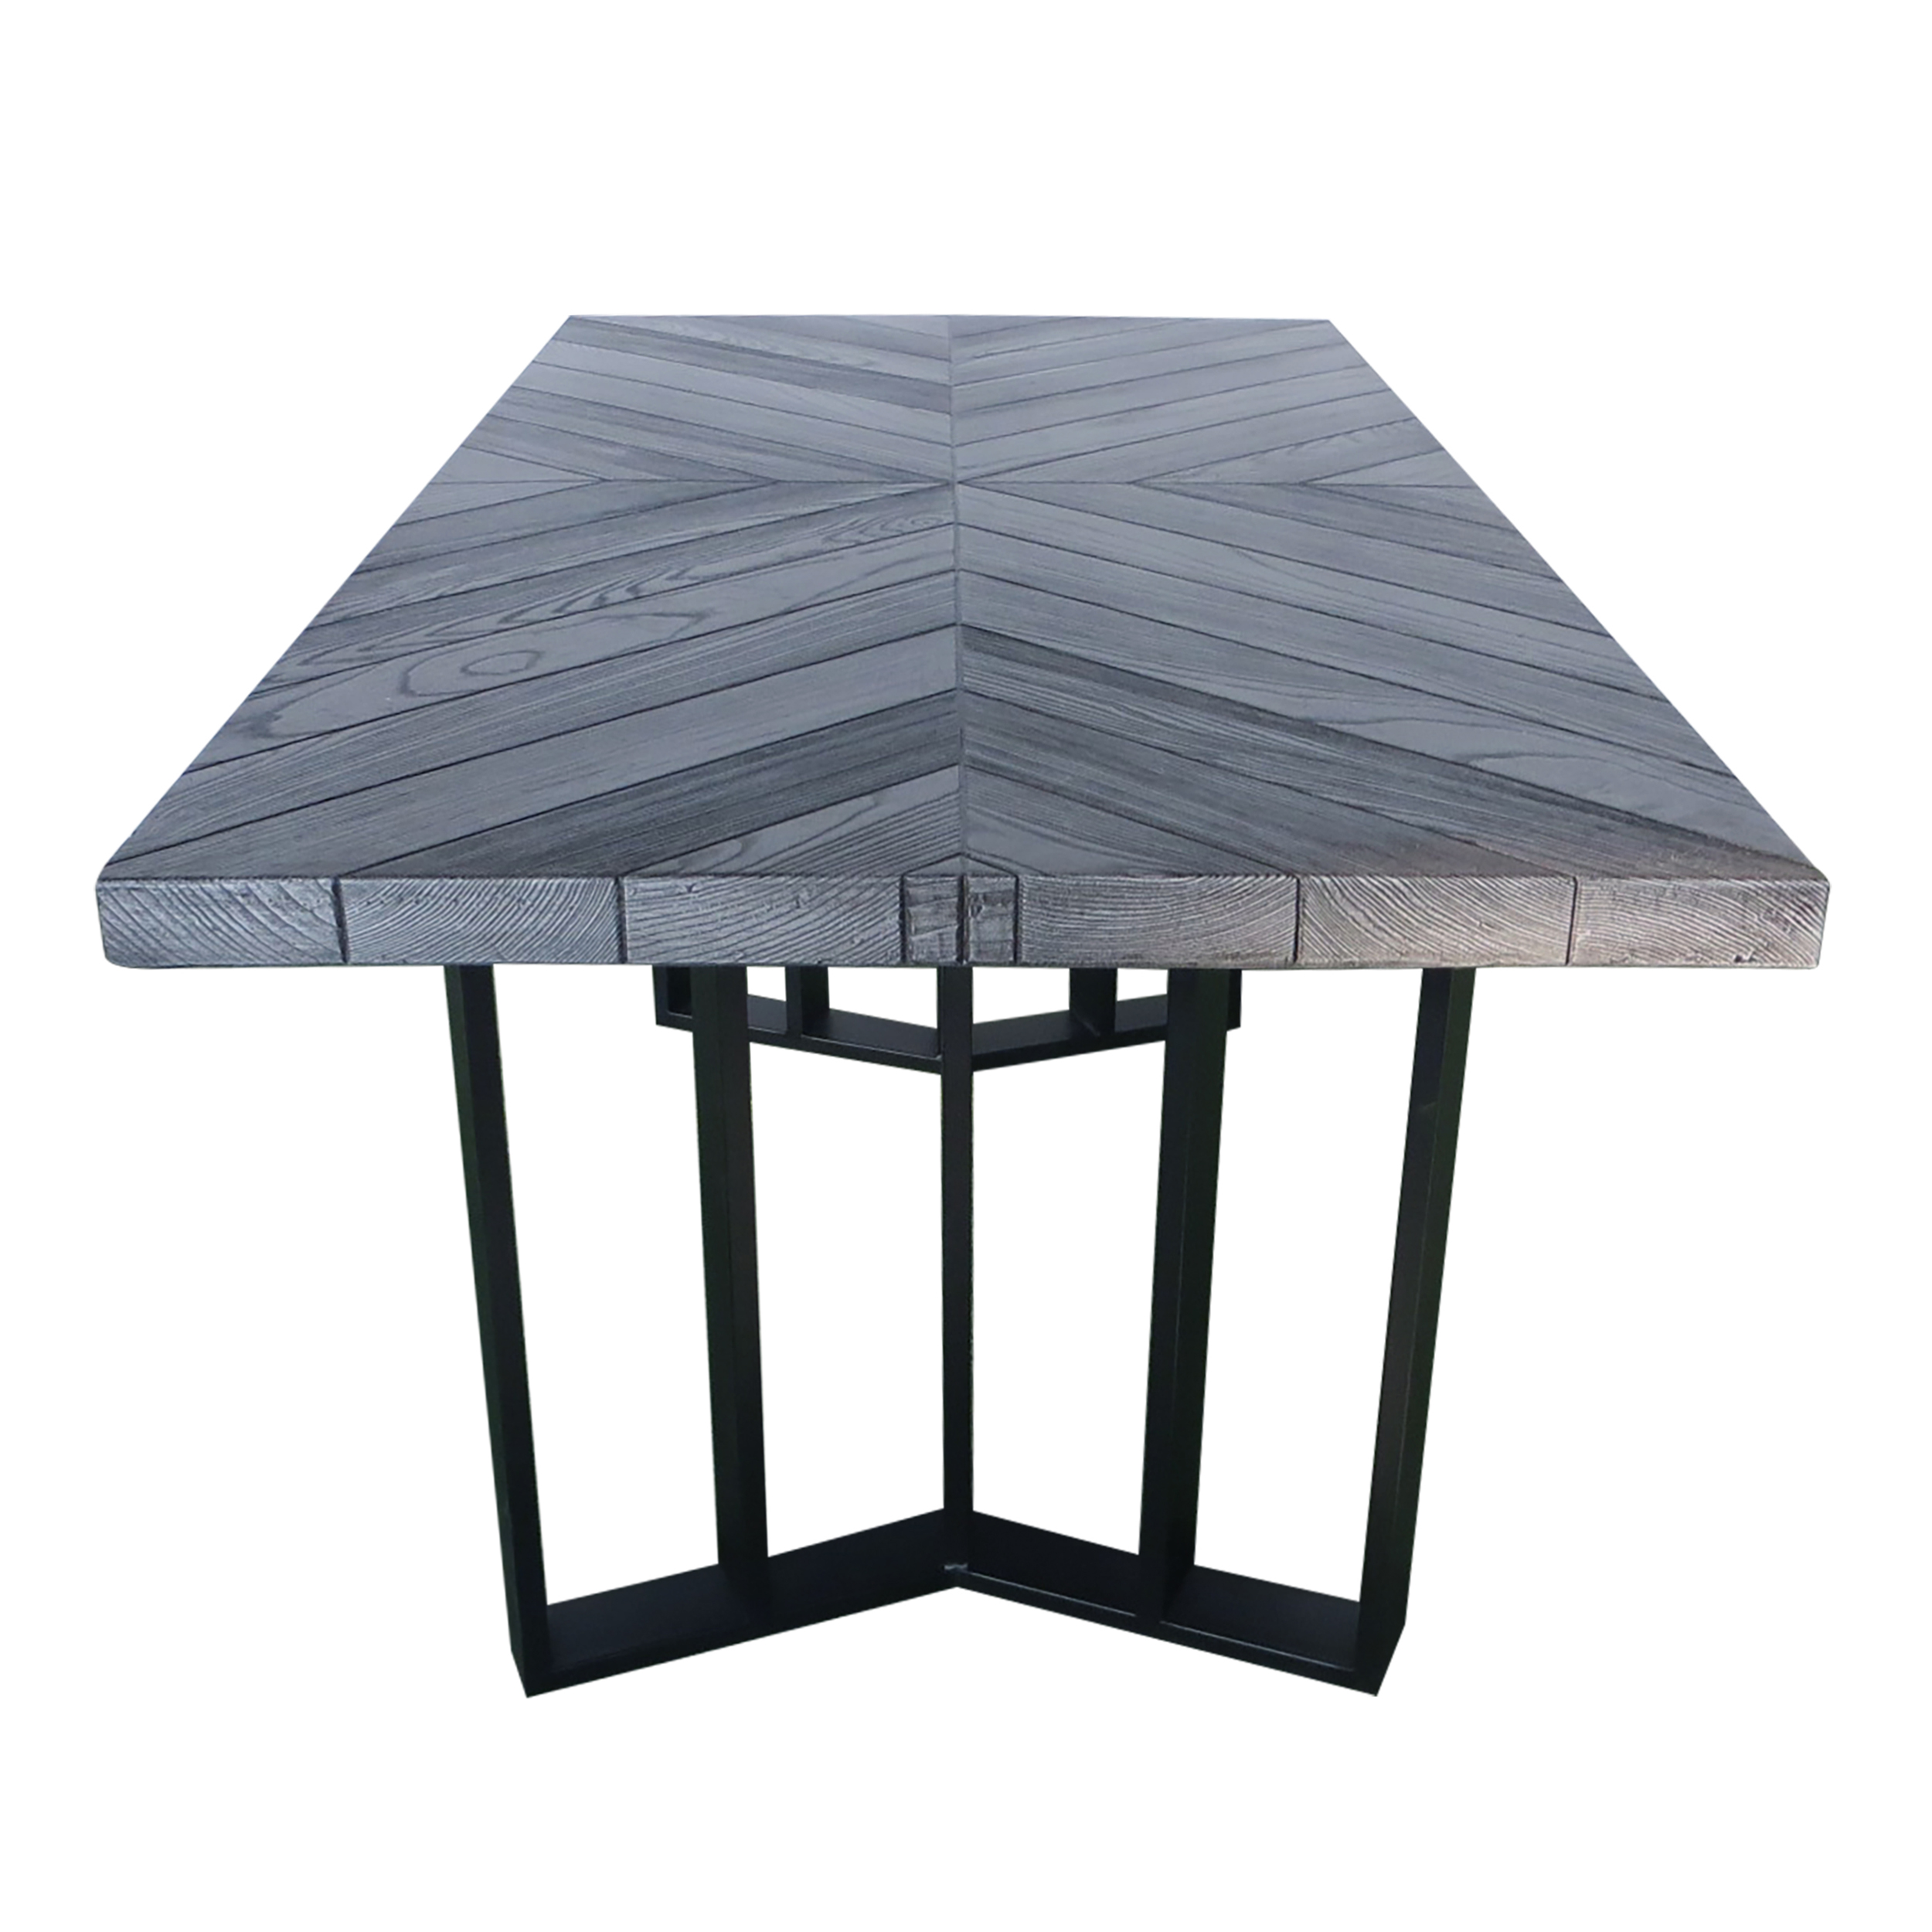 GDF Studio Camden Outdoor Lightweight Concrete Dining Table, Textured Gray Oak and Black - image 5 of 8